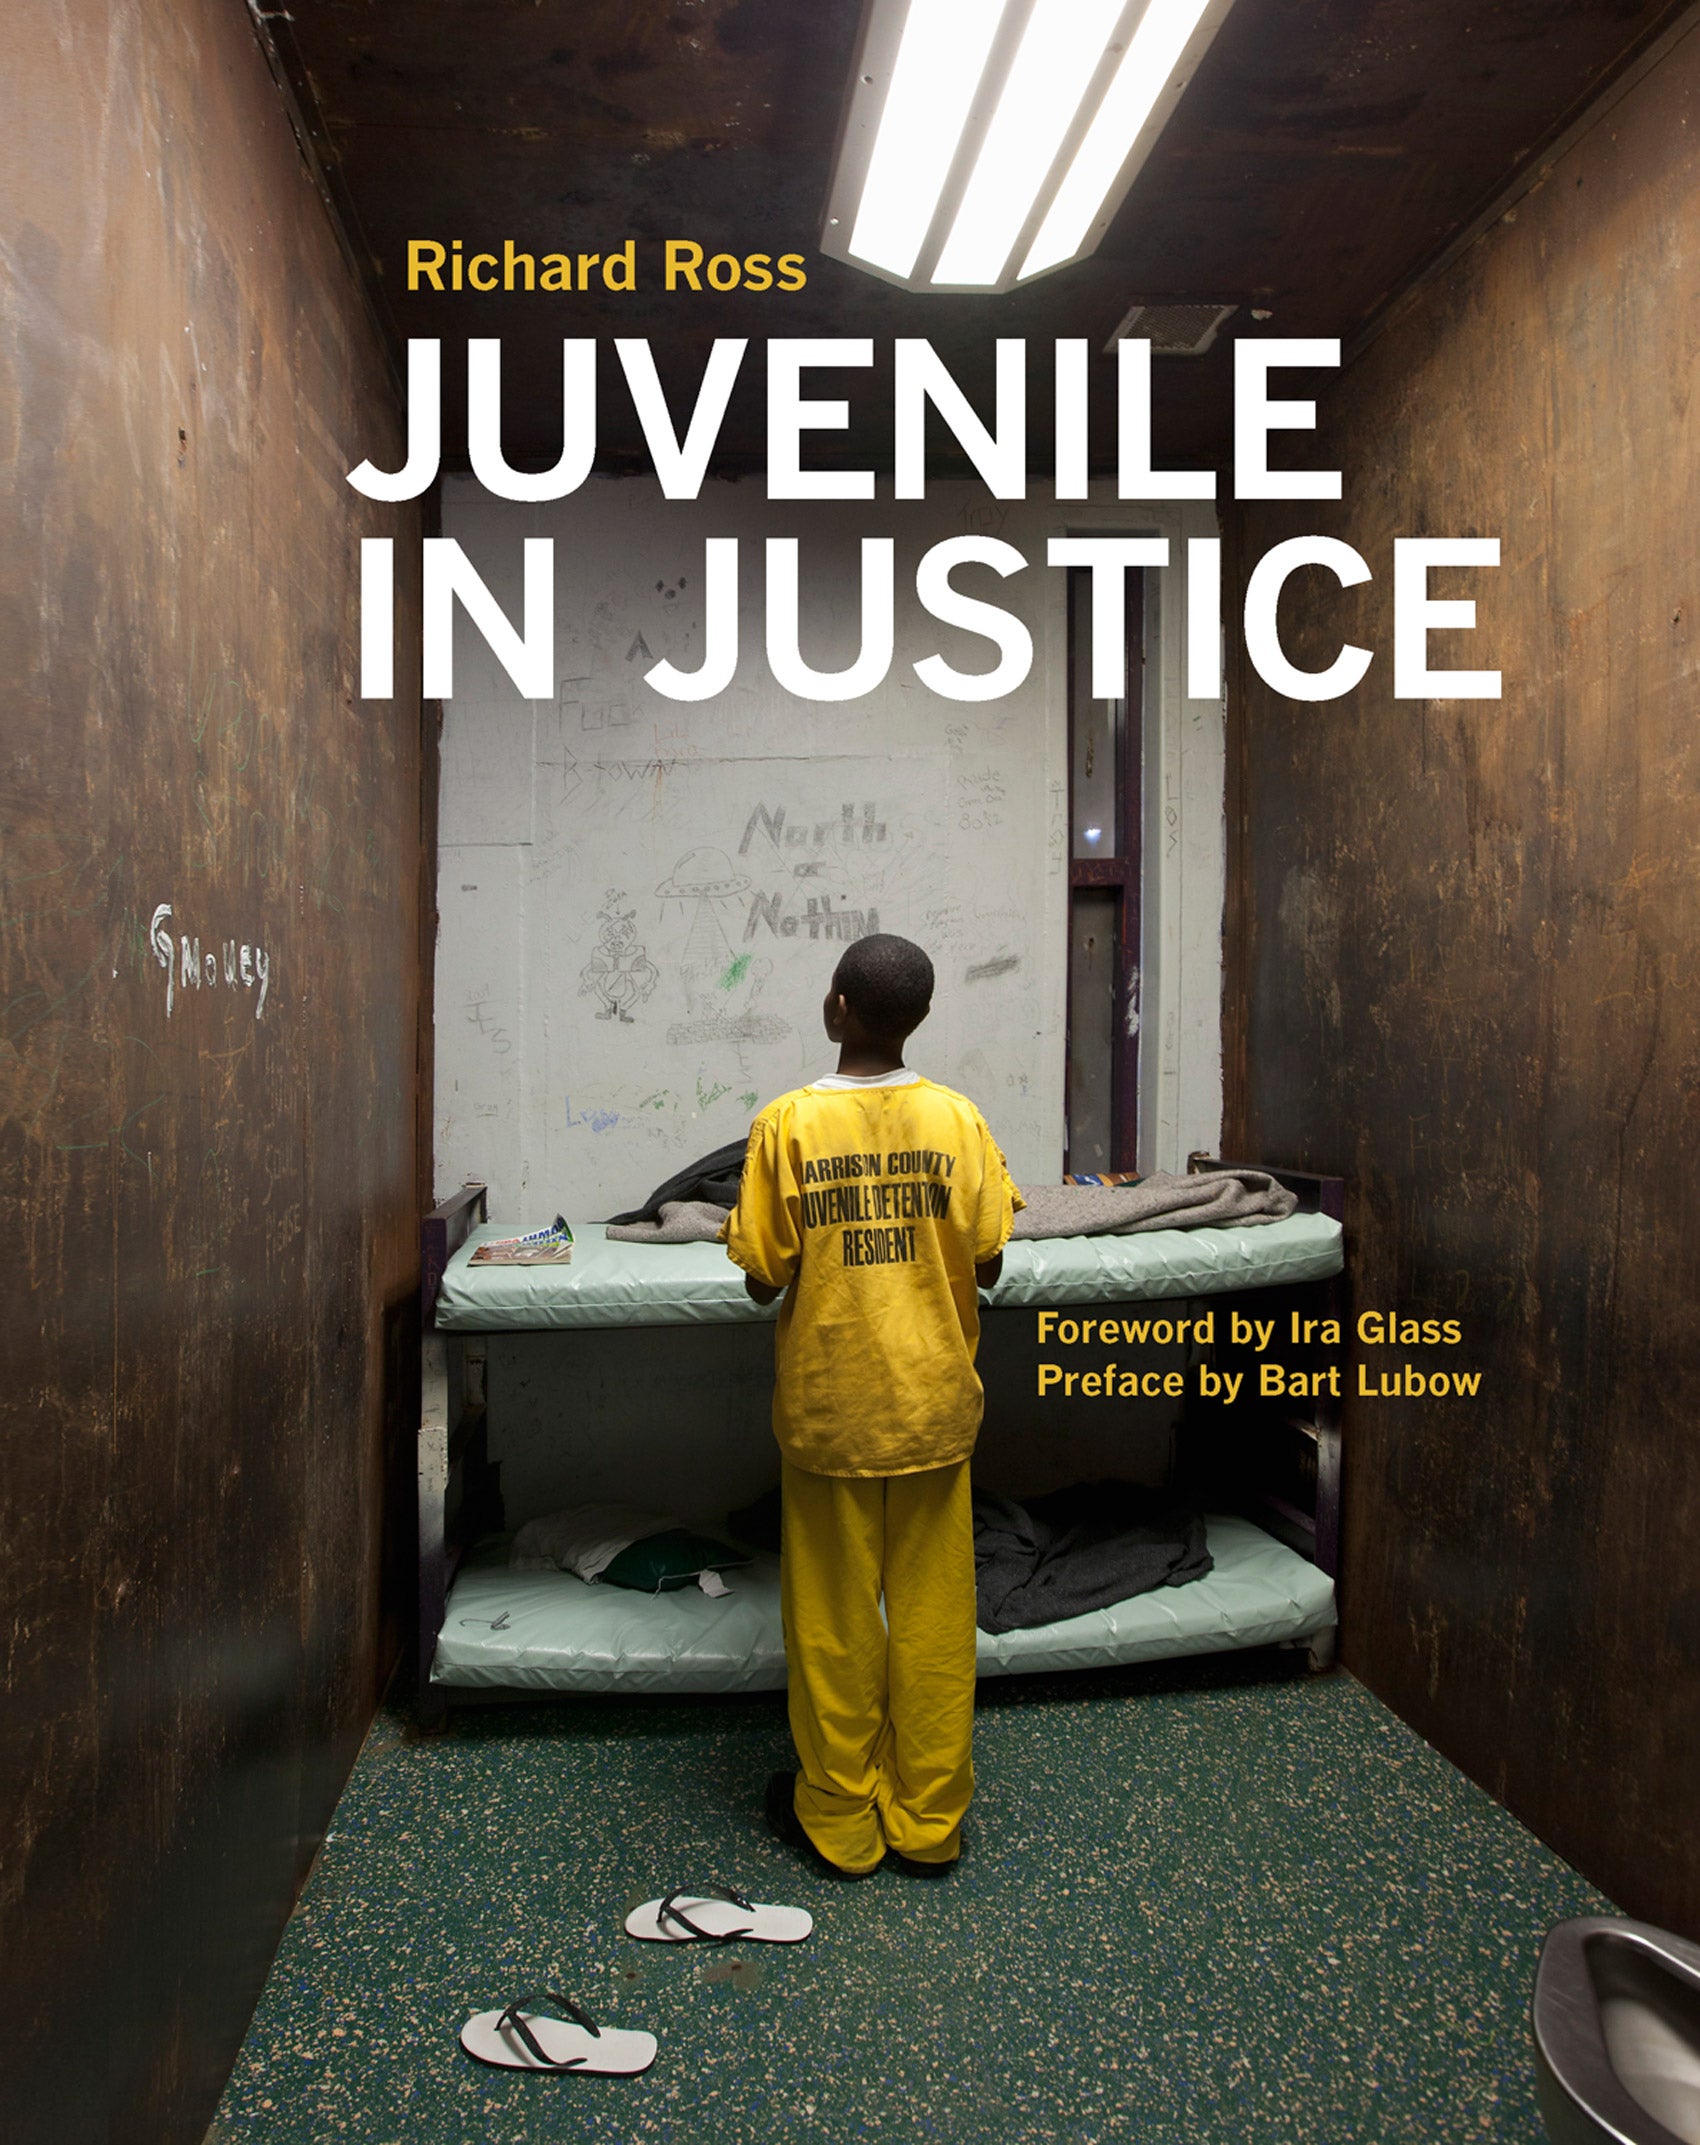 Juveniles in Justice book cover: a 12-year-old juvenile in his windowless cell at Harrison County Juvenile Detention Center in Biloxi, Mississippi